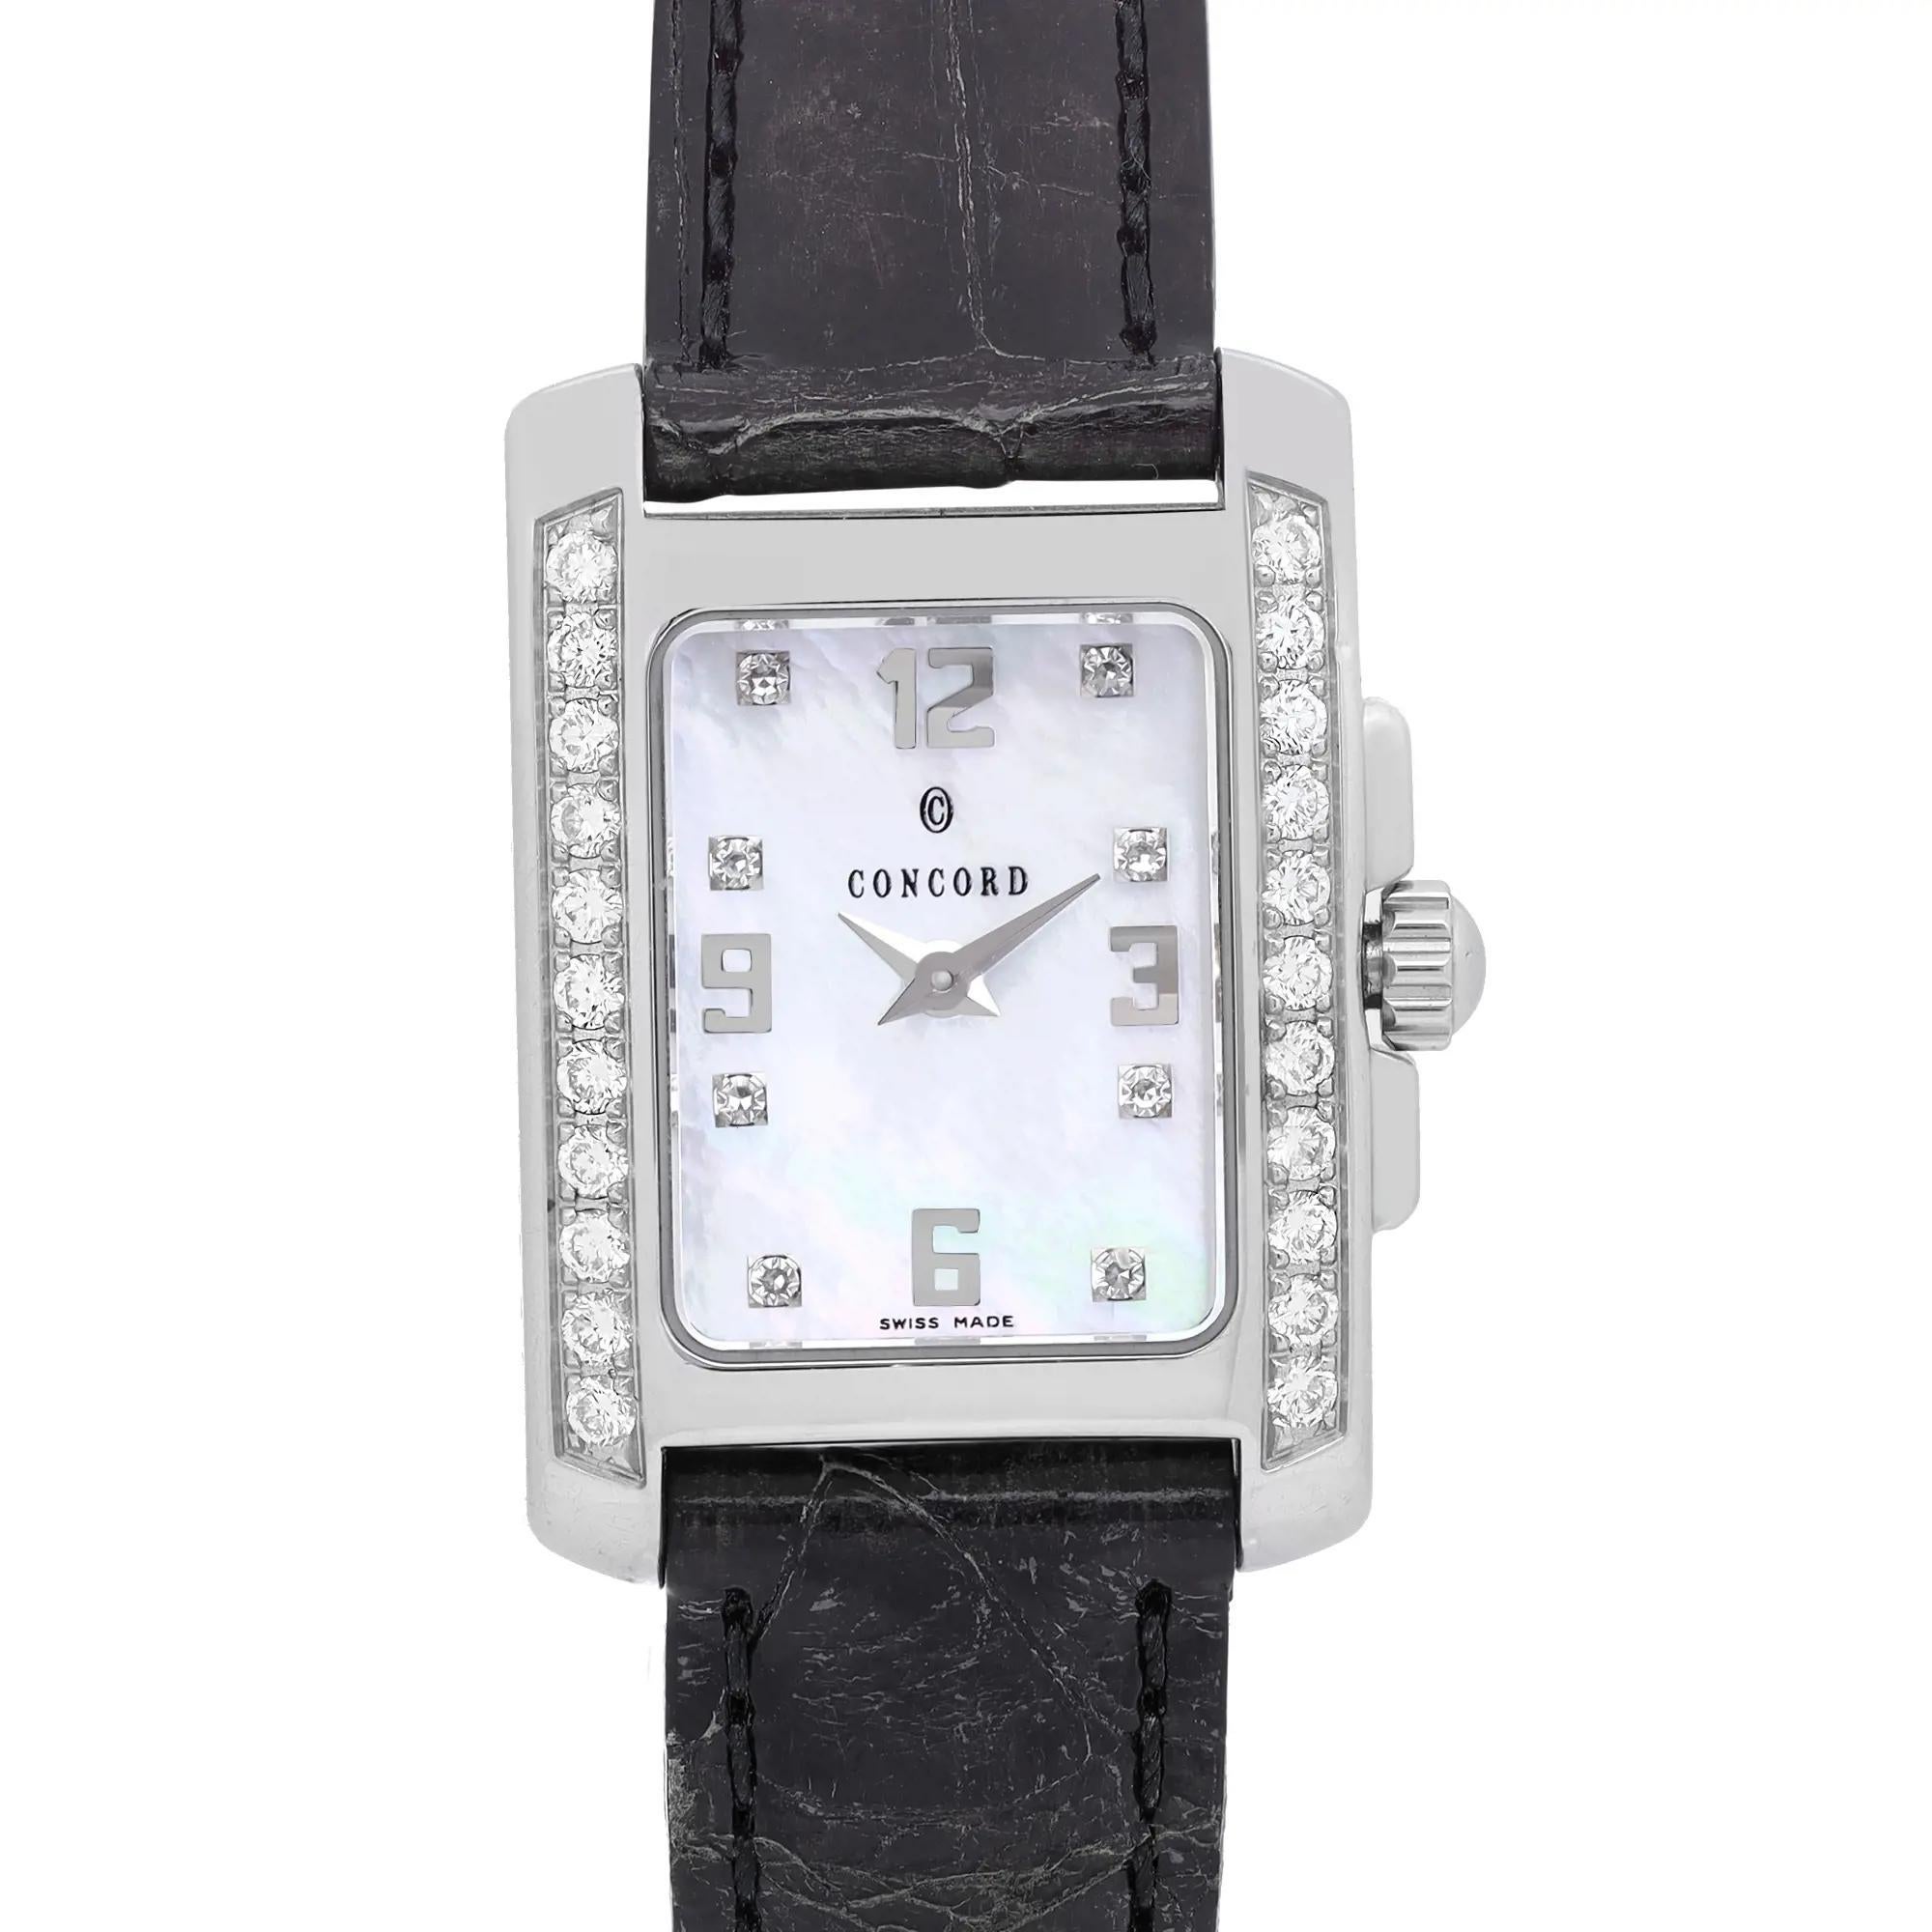 The leather strap has wrinkles and imperfections but is in good condition overall. No original box and papers.

 Brand: Concord  Type: Wristwatch  Department: Women  Model Number: 14.25.662.1  Theme: Elegant  Country/Region of Manufacture: